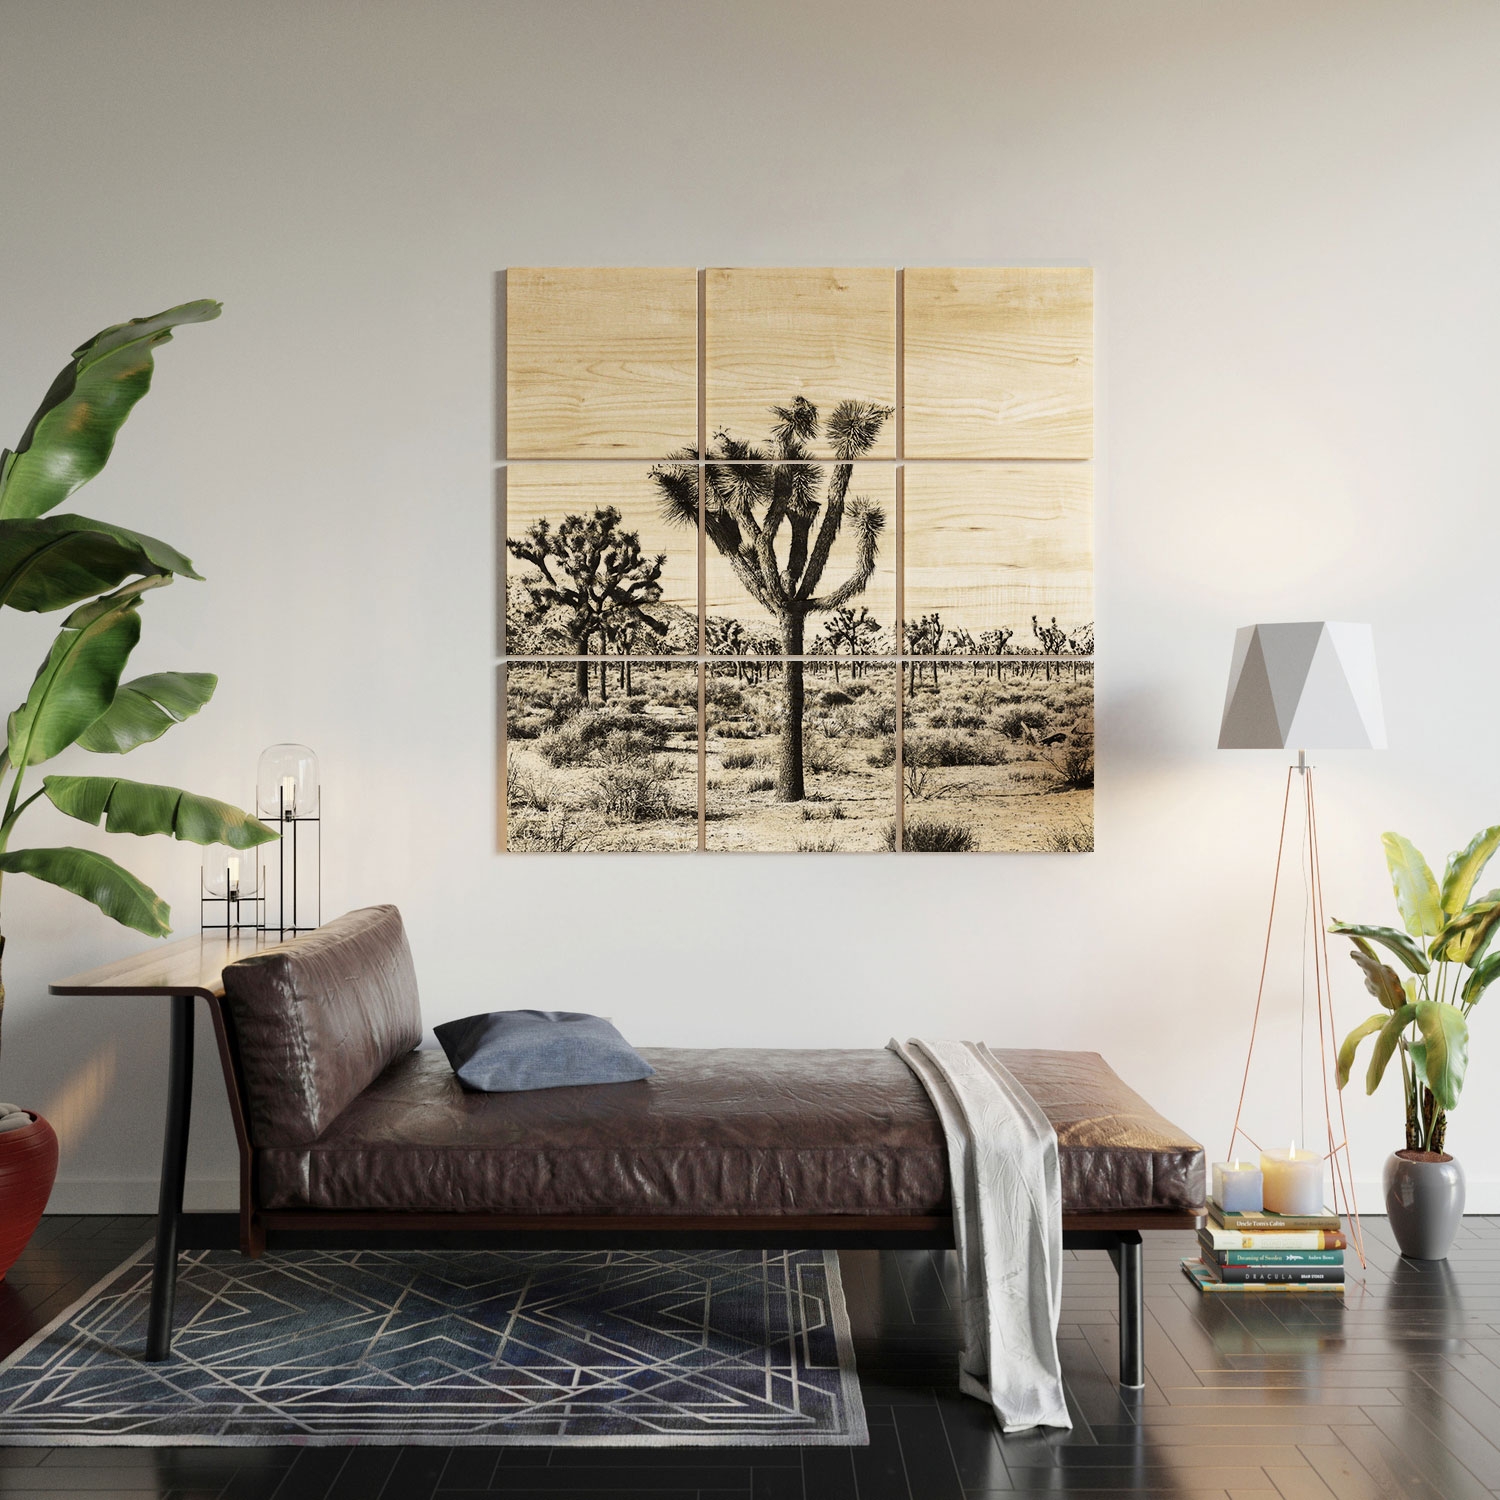 Joshua Trees by Bree Madden - Wood Wall Mural3' X 3' (Nine 12" Wood Squares) - Image 1